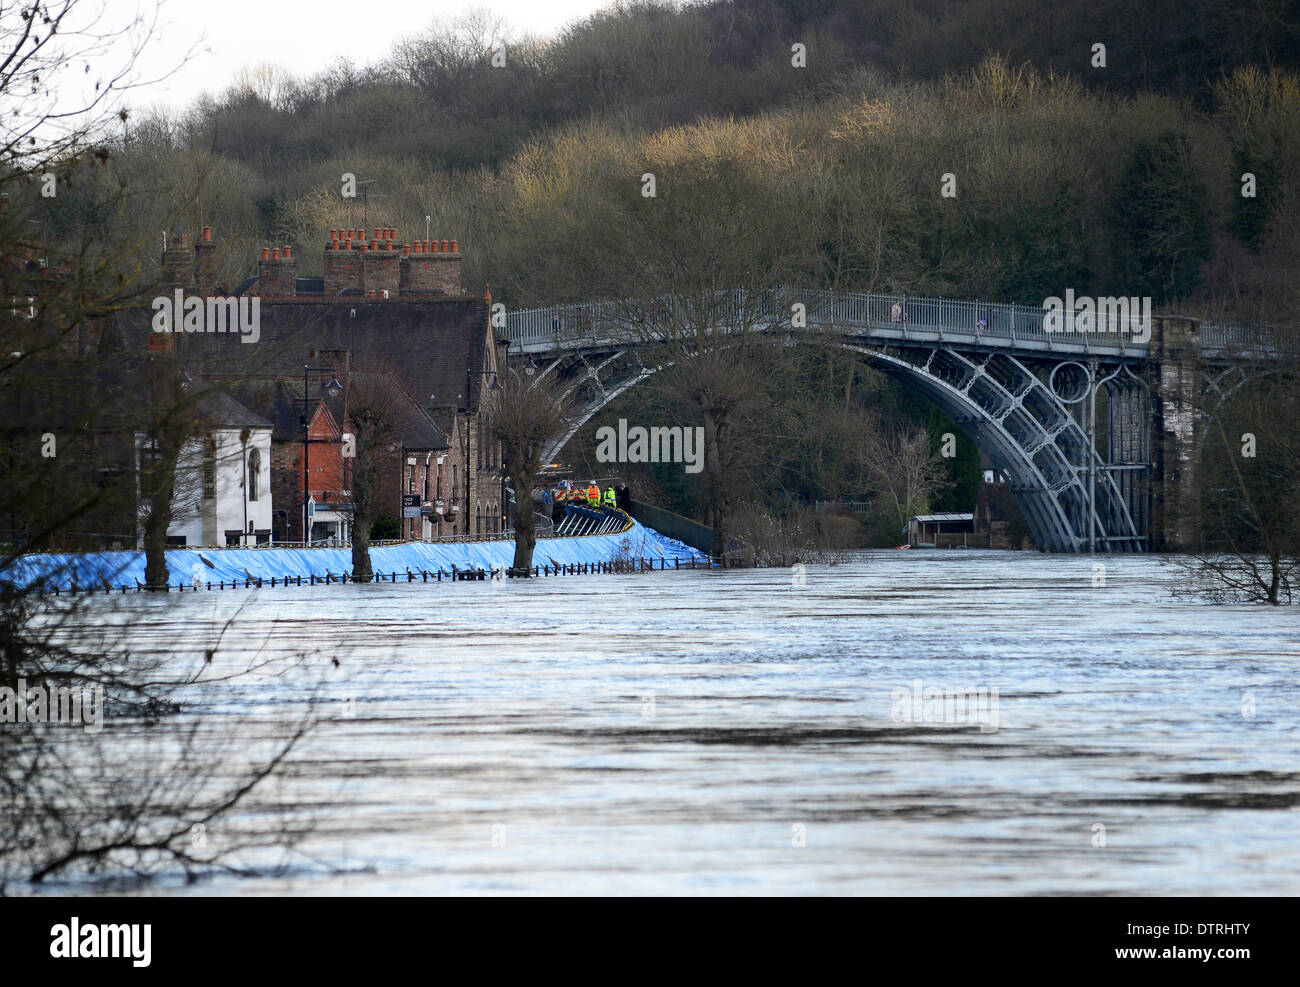 Flood barriers in Ironbridge Shropshire Uk defending the town from the River Severn Stock Photo